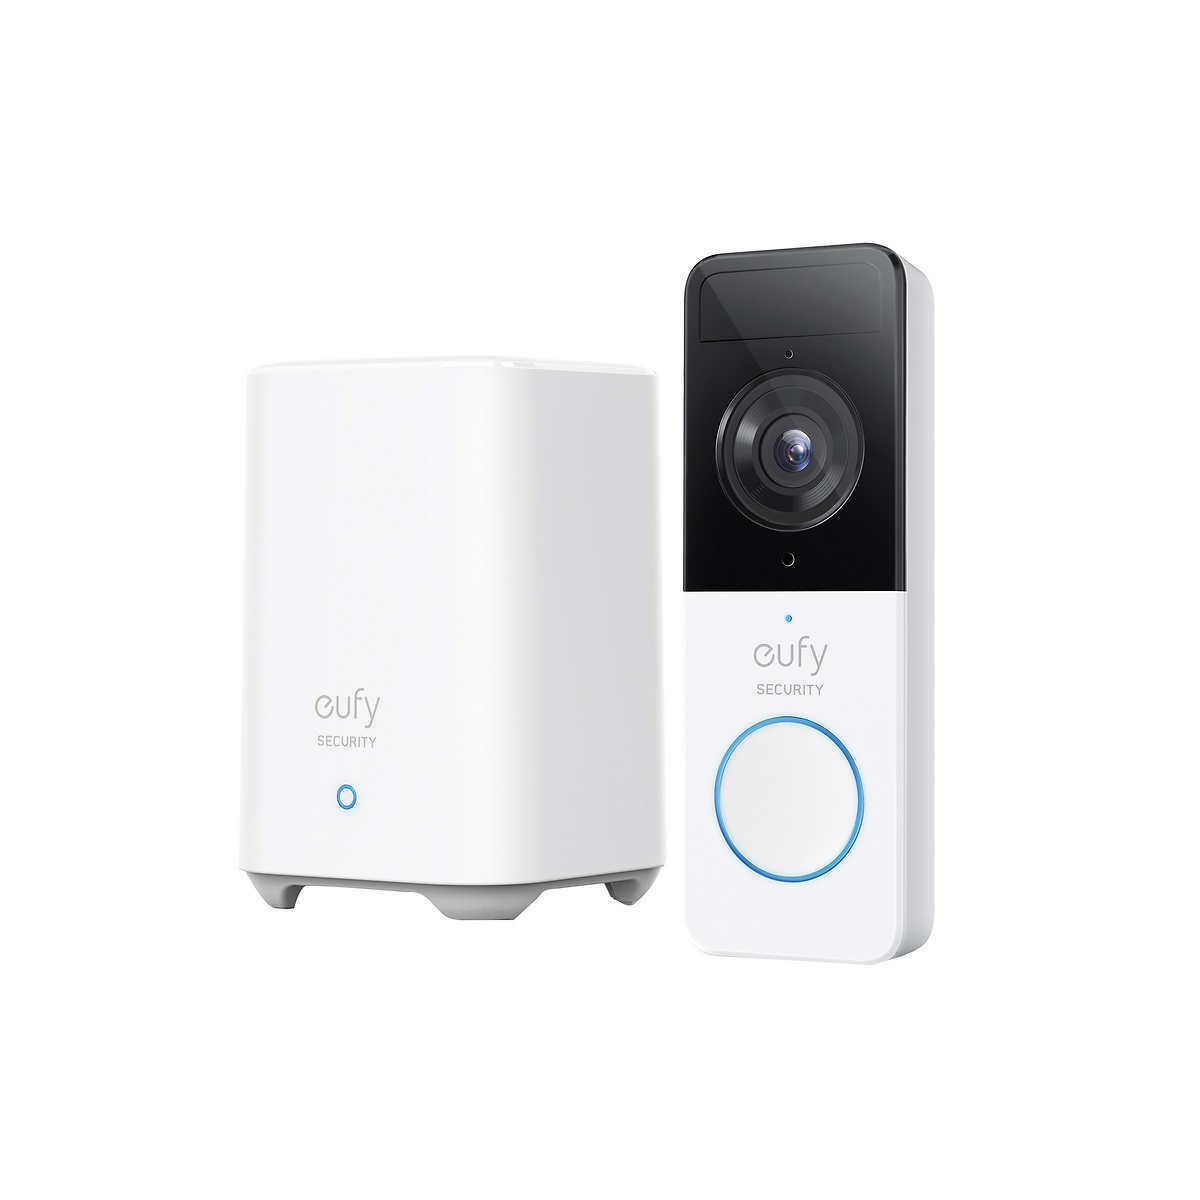 Eufy Security 2K Video Doorbell (Battery) with Homebase (Refurbished) $76.99 + Free Shipping